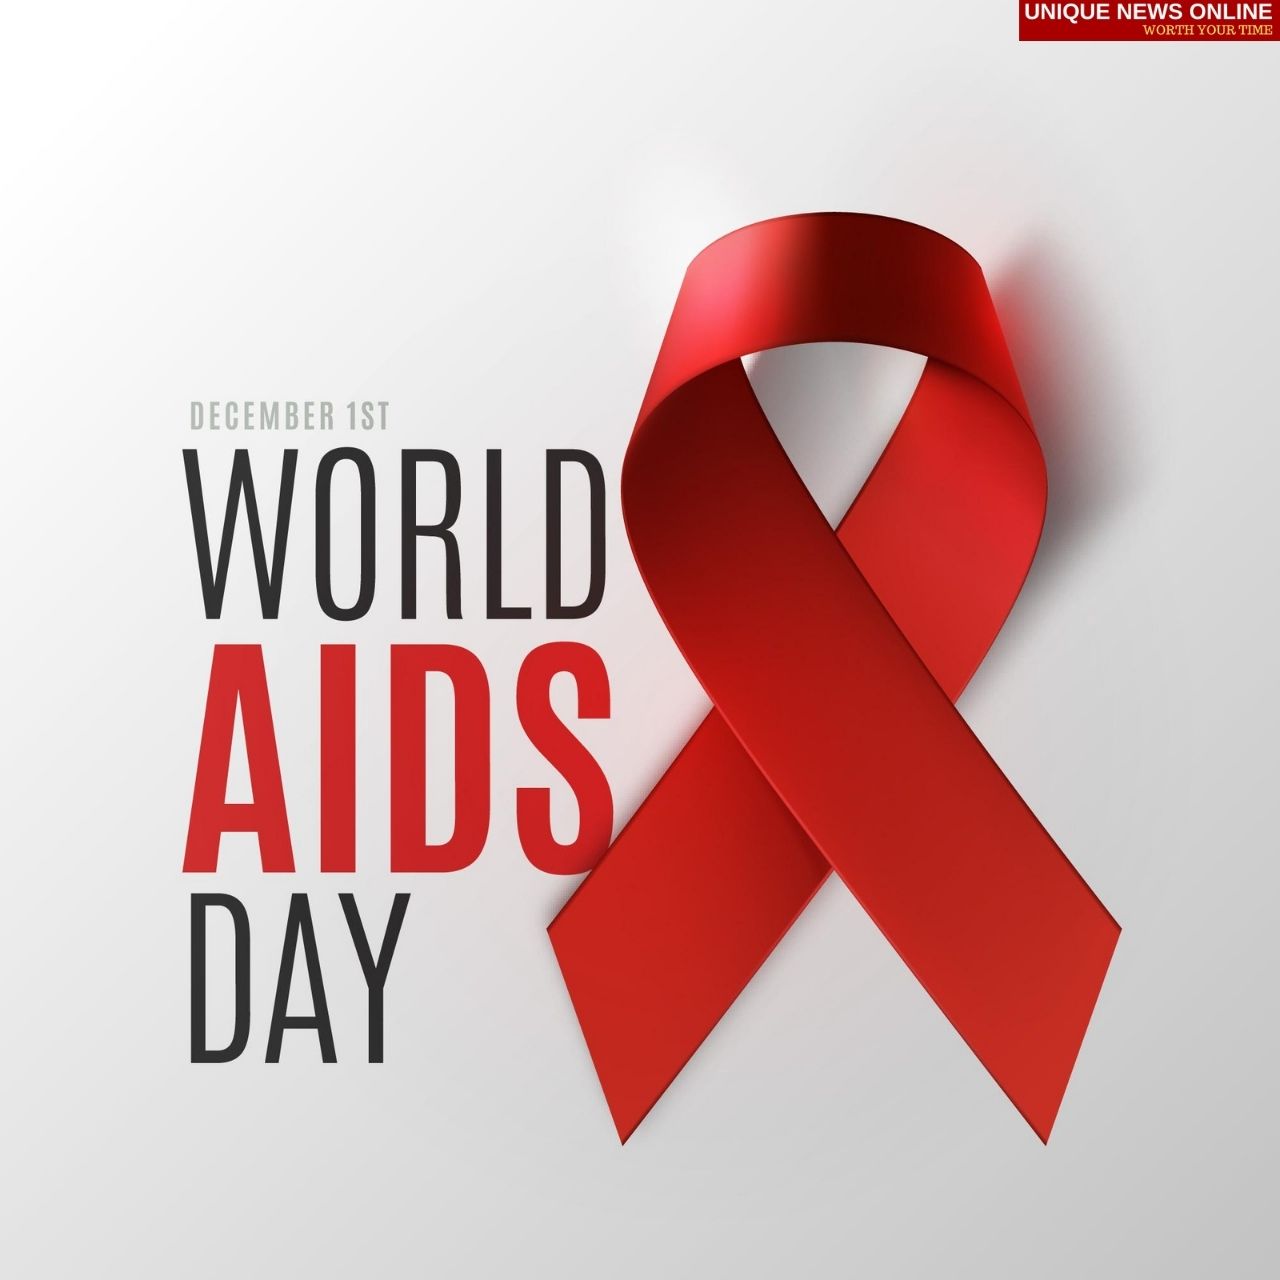 World AIDS Day 2021 Date, Theme, History, Significance, Importance, Activities, Ideas, and More